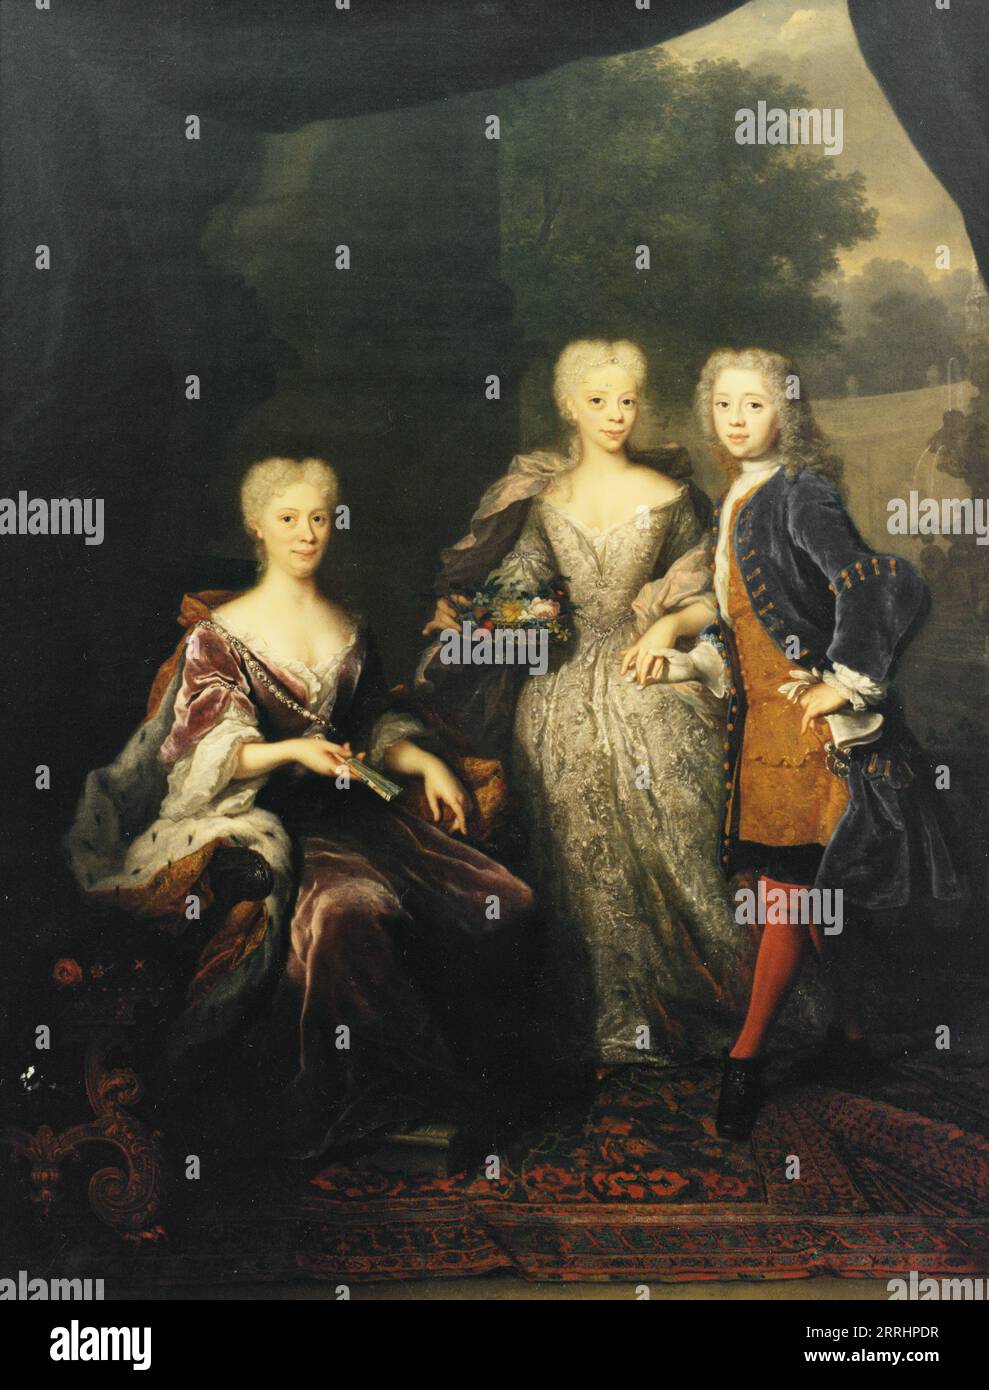 Marie Louise , 1688-1765, Princess of Hesse-Kassel, married to John William Friso of Nassau-Dietz and of Orange, with her children Anne Charlotte Amelie and Willem Karel Hendrik Friso, 1726. Stock Photo